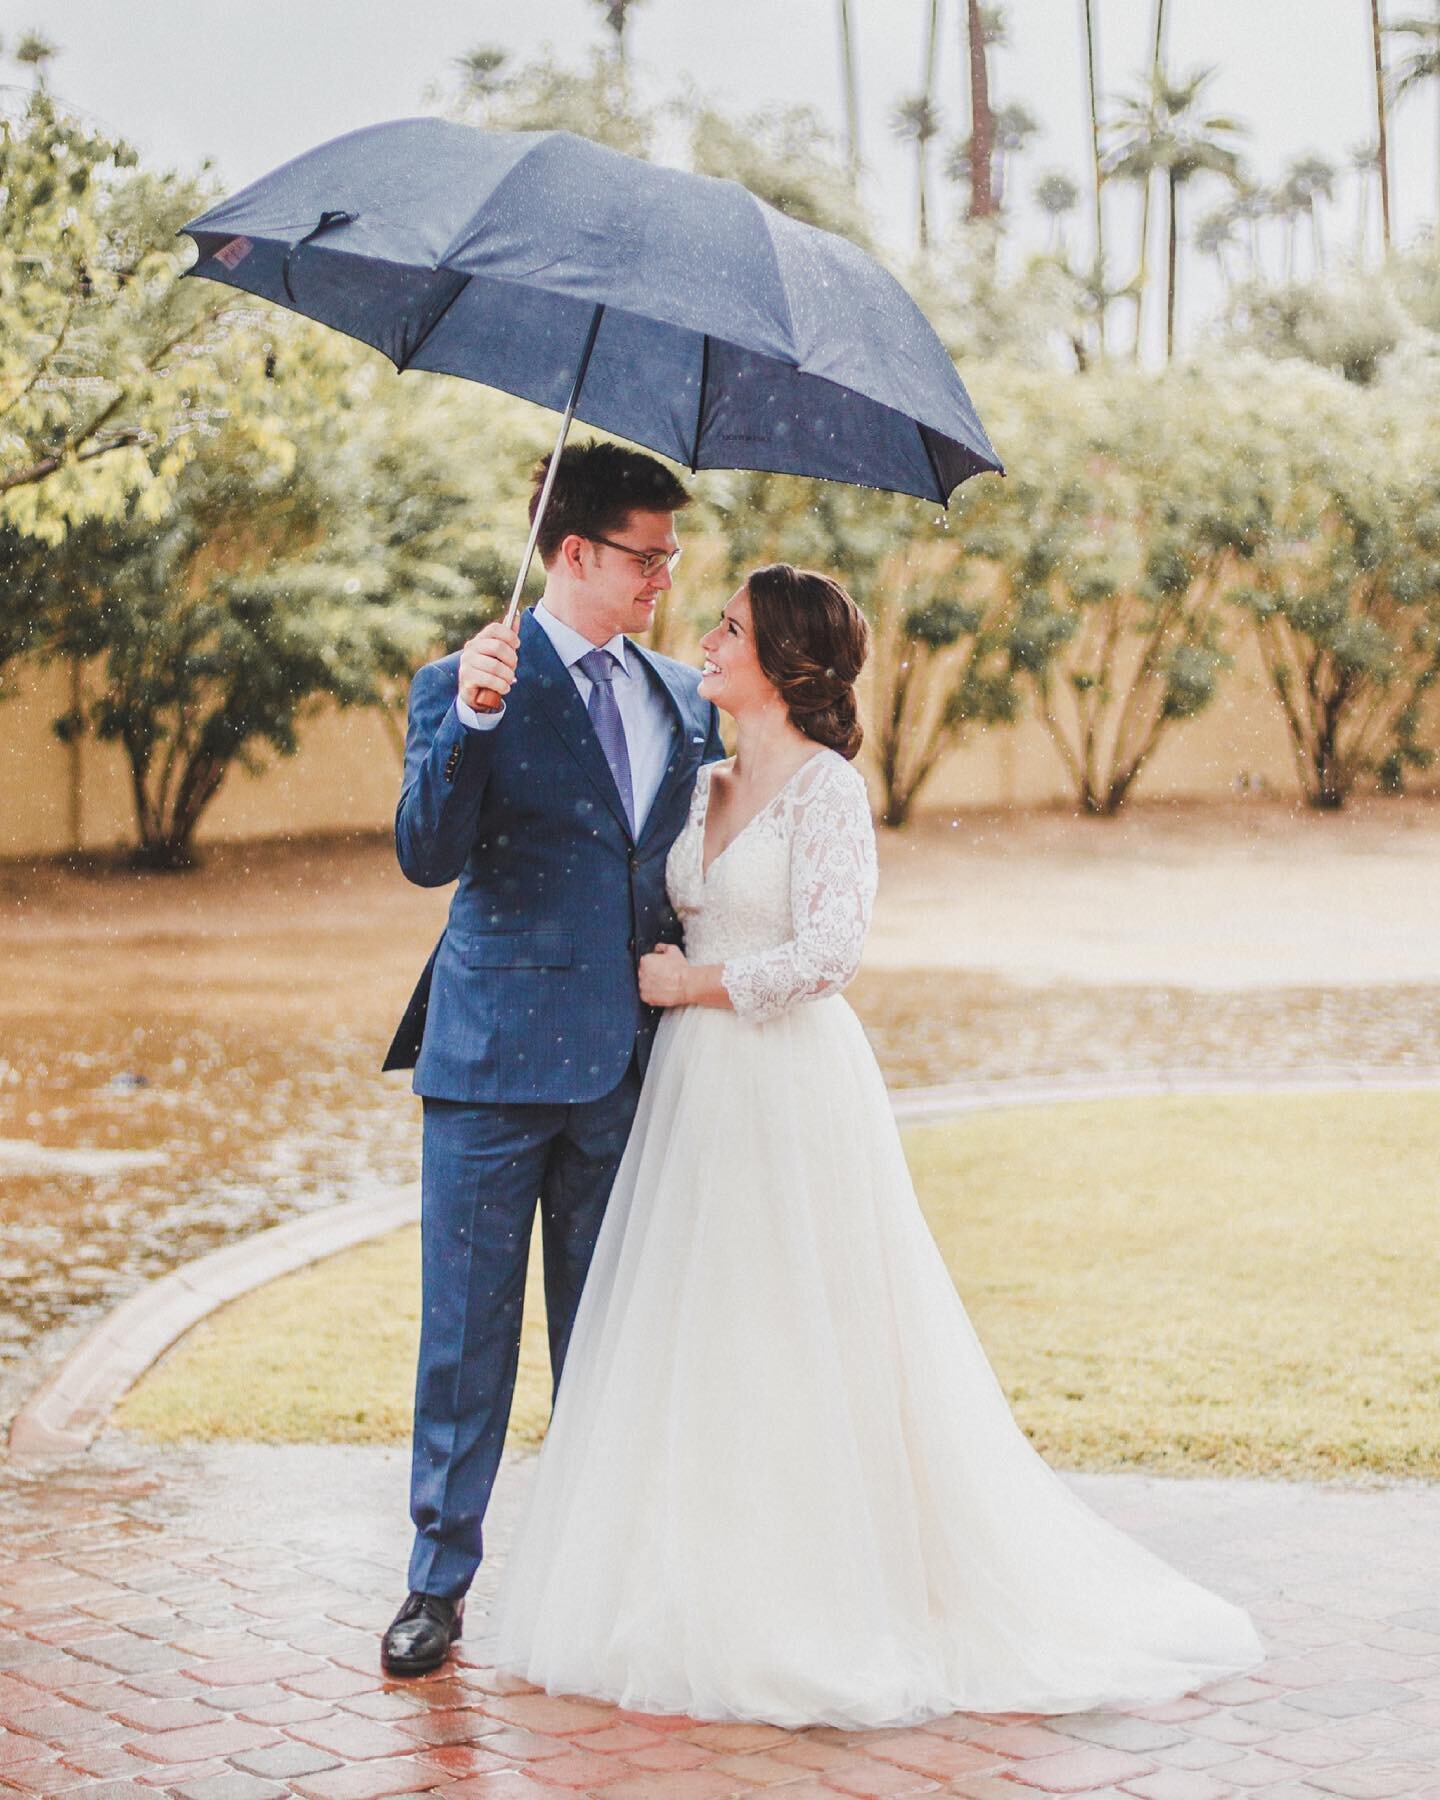 A little rain has never stopped us from creating magic!